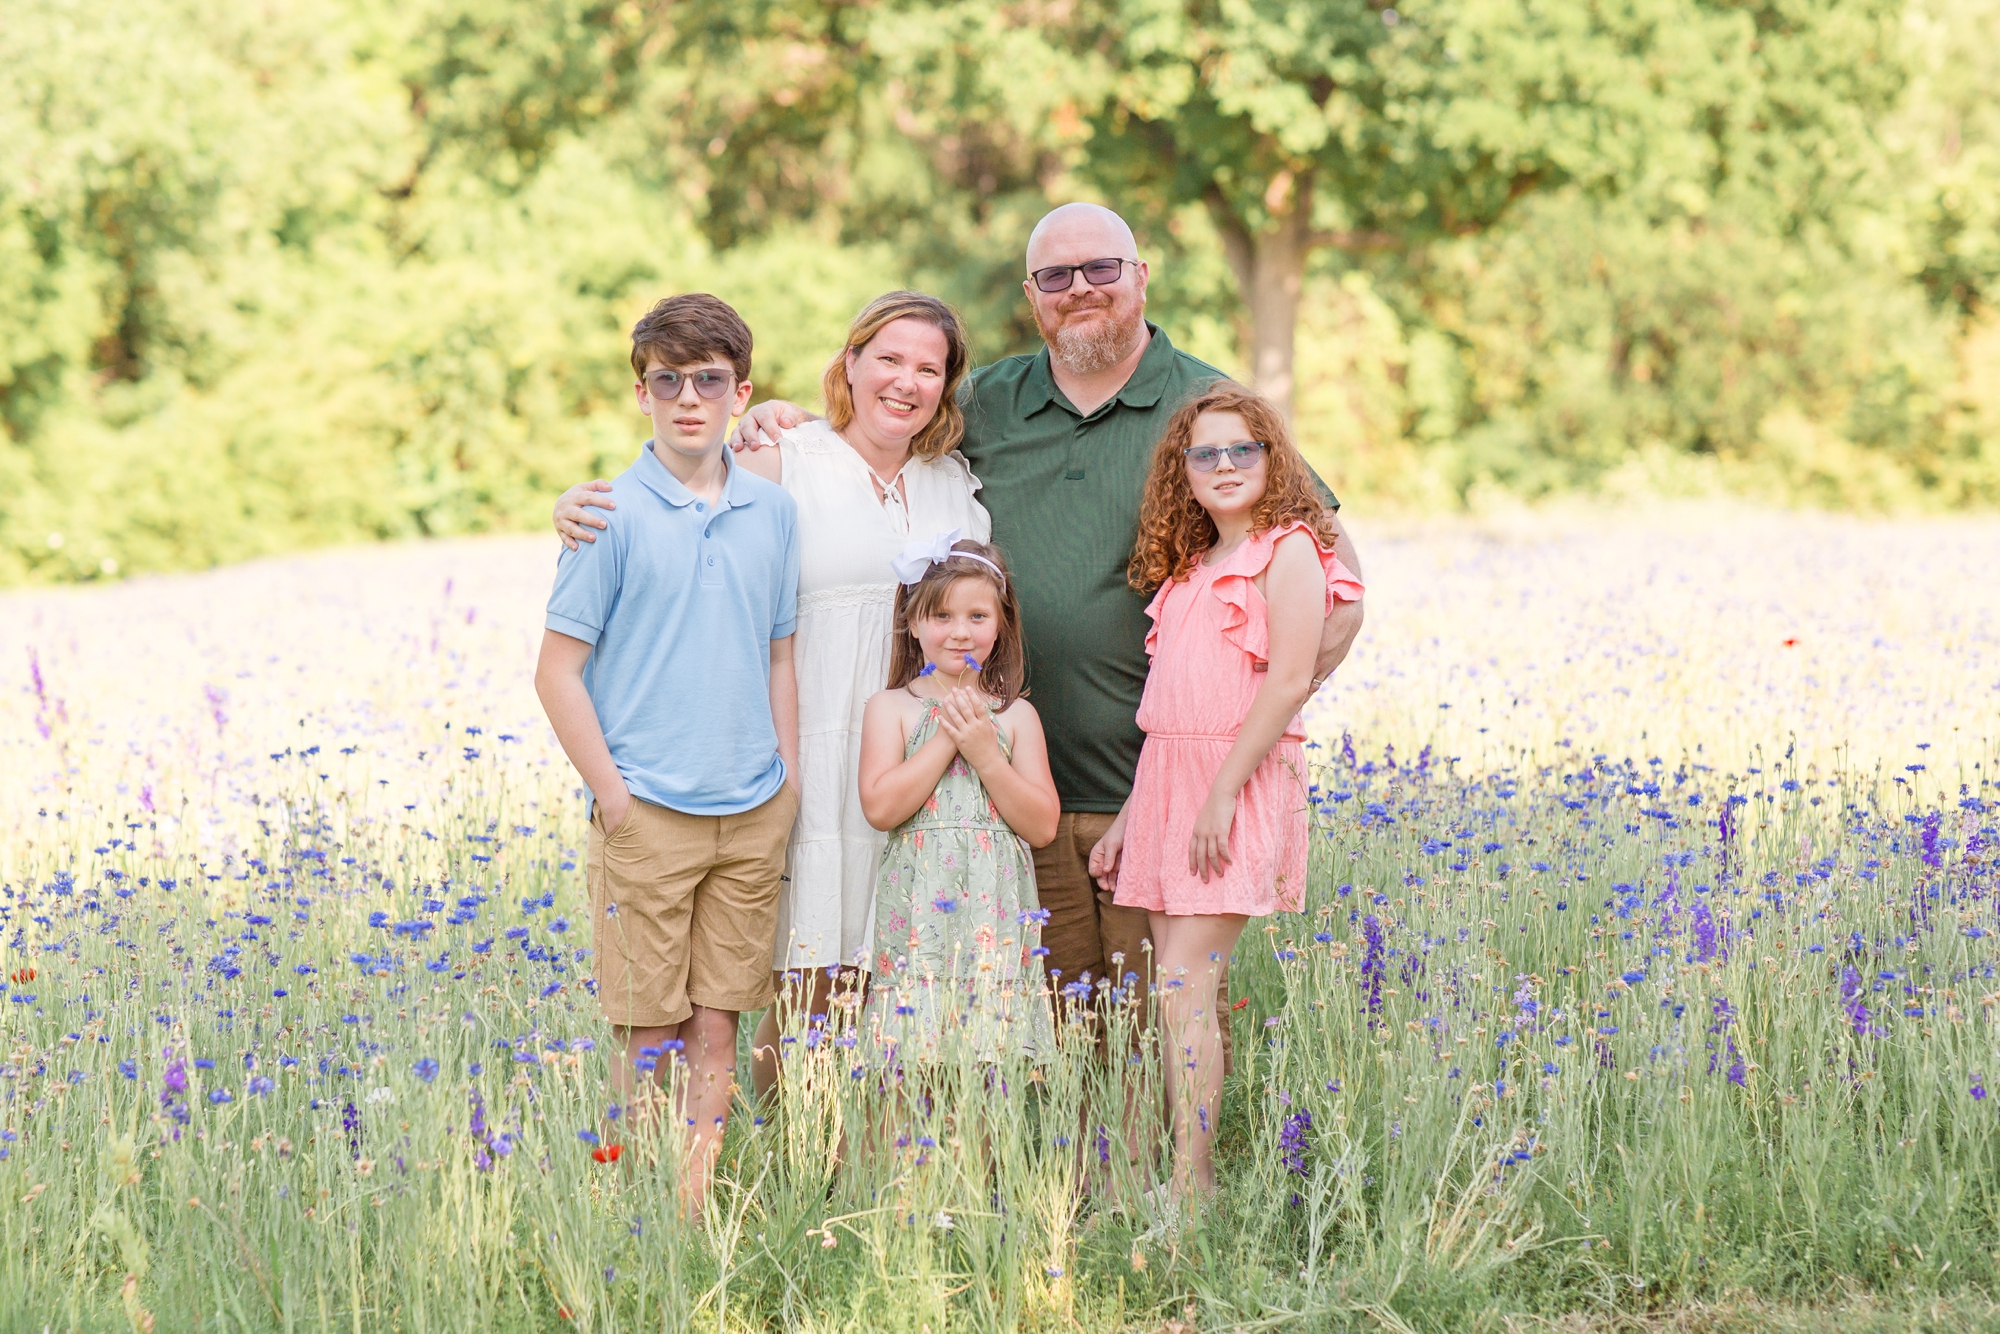 Family of 5 poses in field of wildflowers in RIchardson, Texas during wildflower mini sessions with family photographer and educator Rebecca Rice of Rebecca Rice Photography. Click to see more from this session live on the blog now!